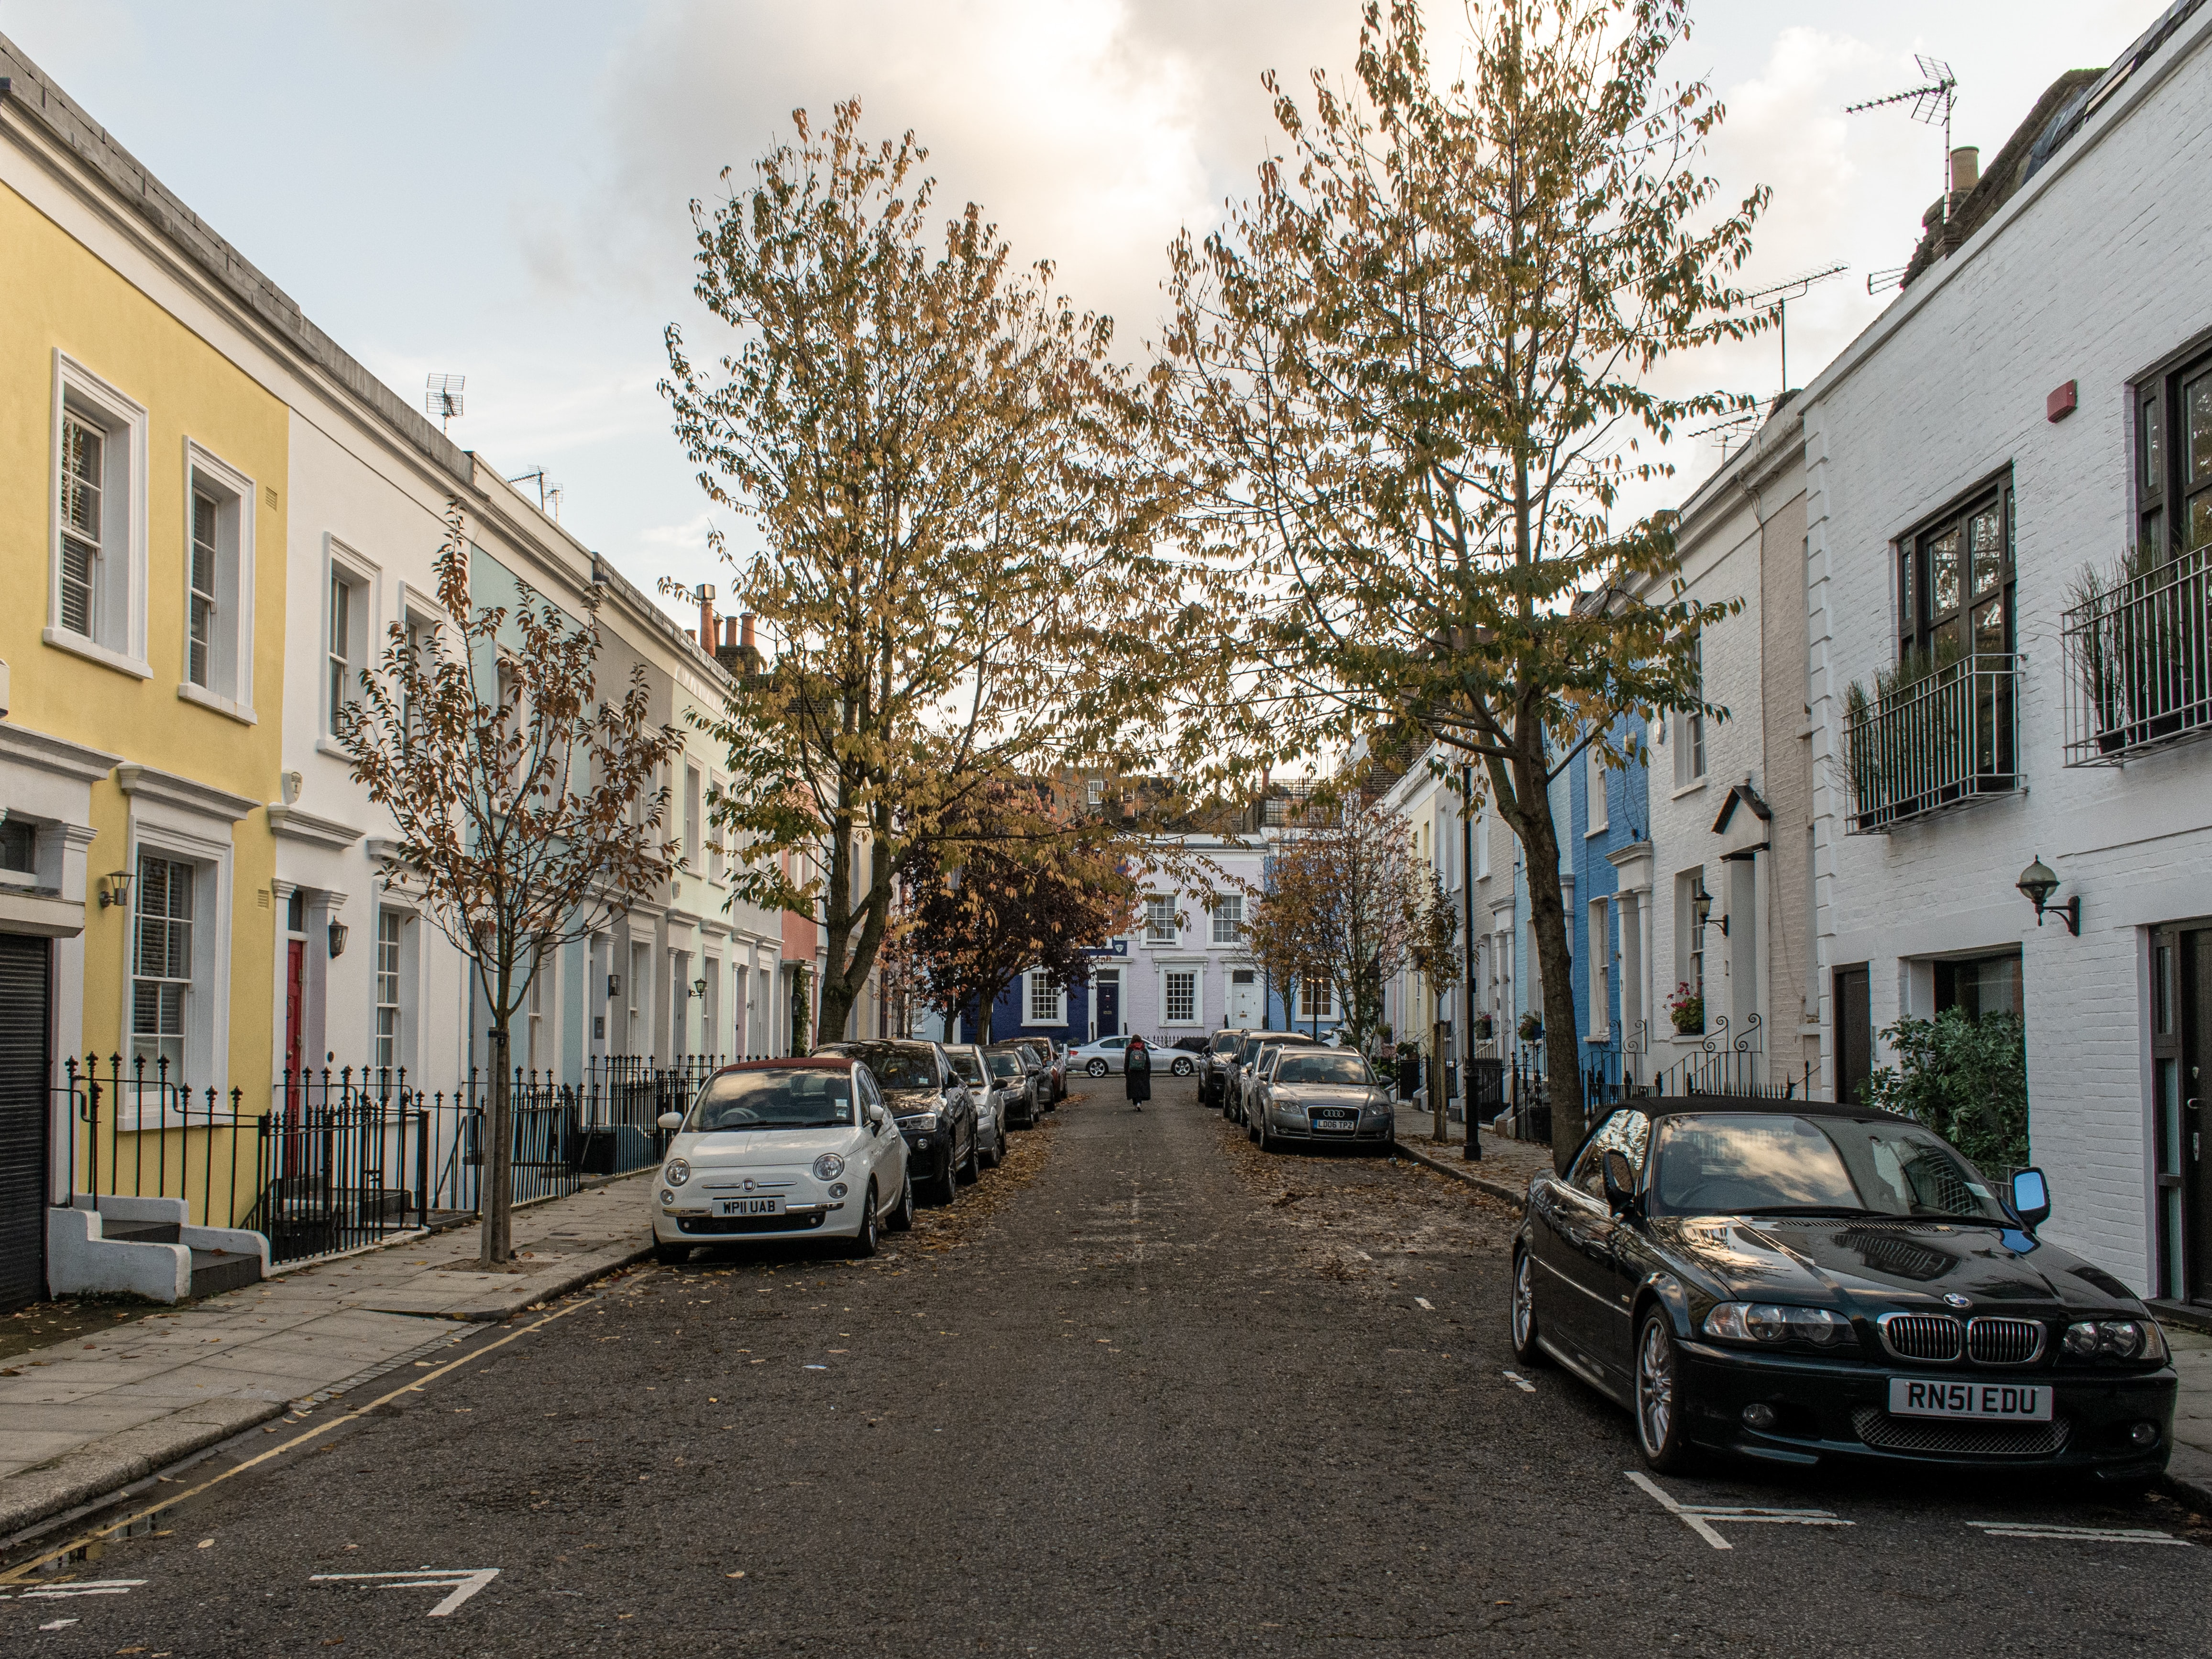 Period properties in Notting Hill